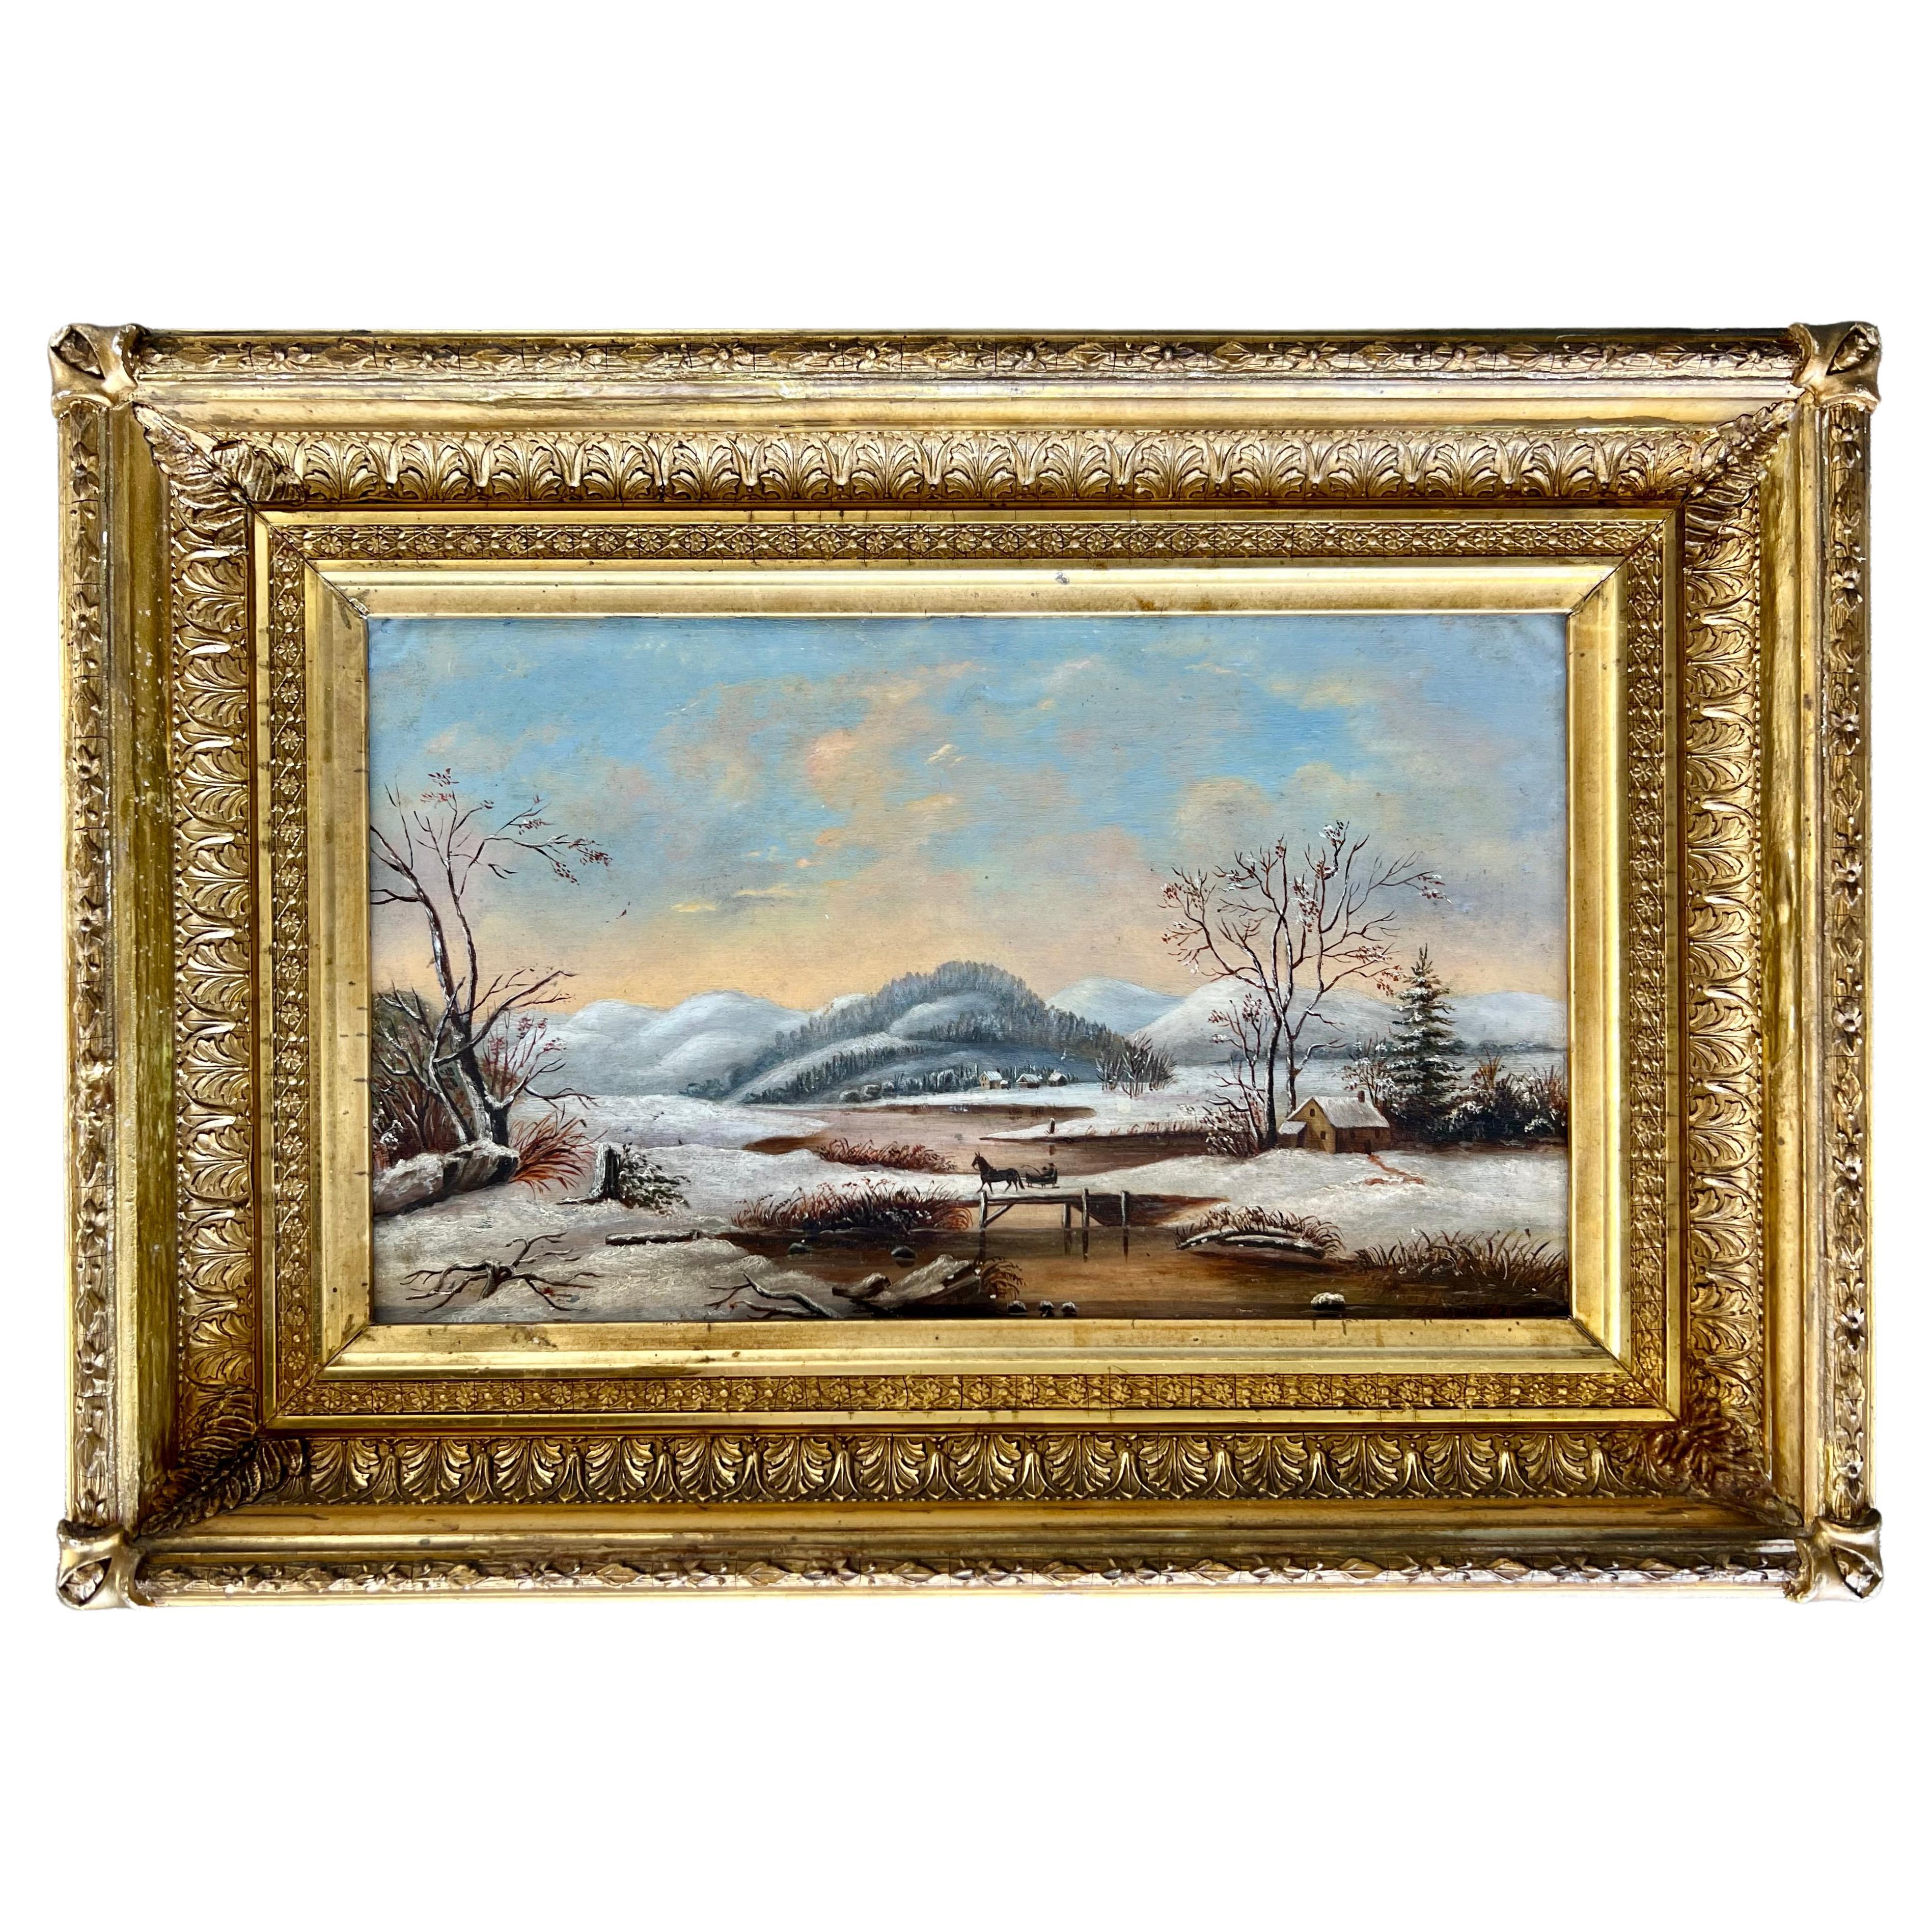 "A Sleigh Ride in New England" American School Painting